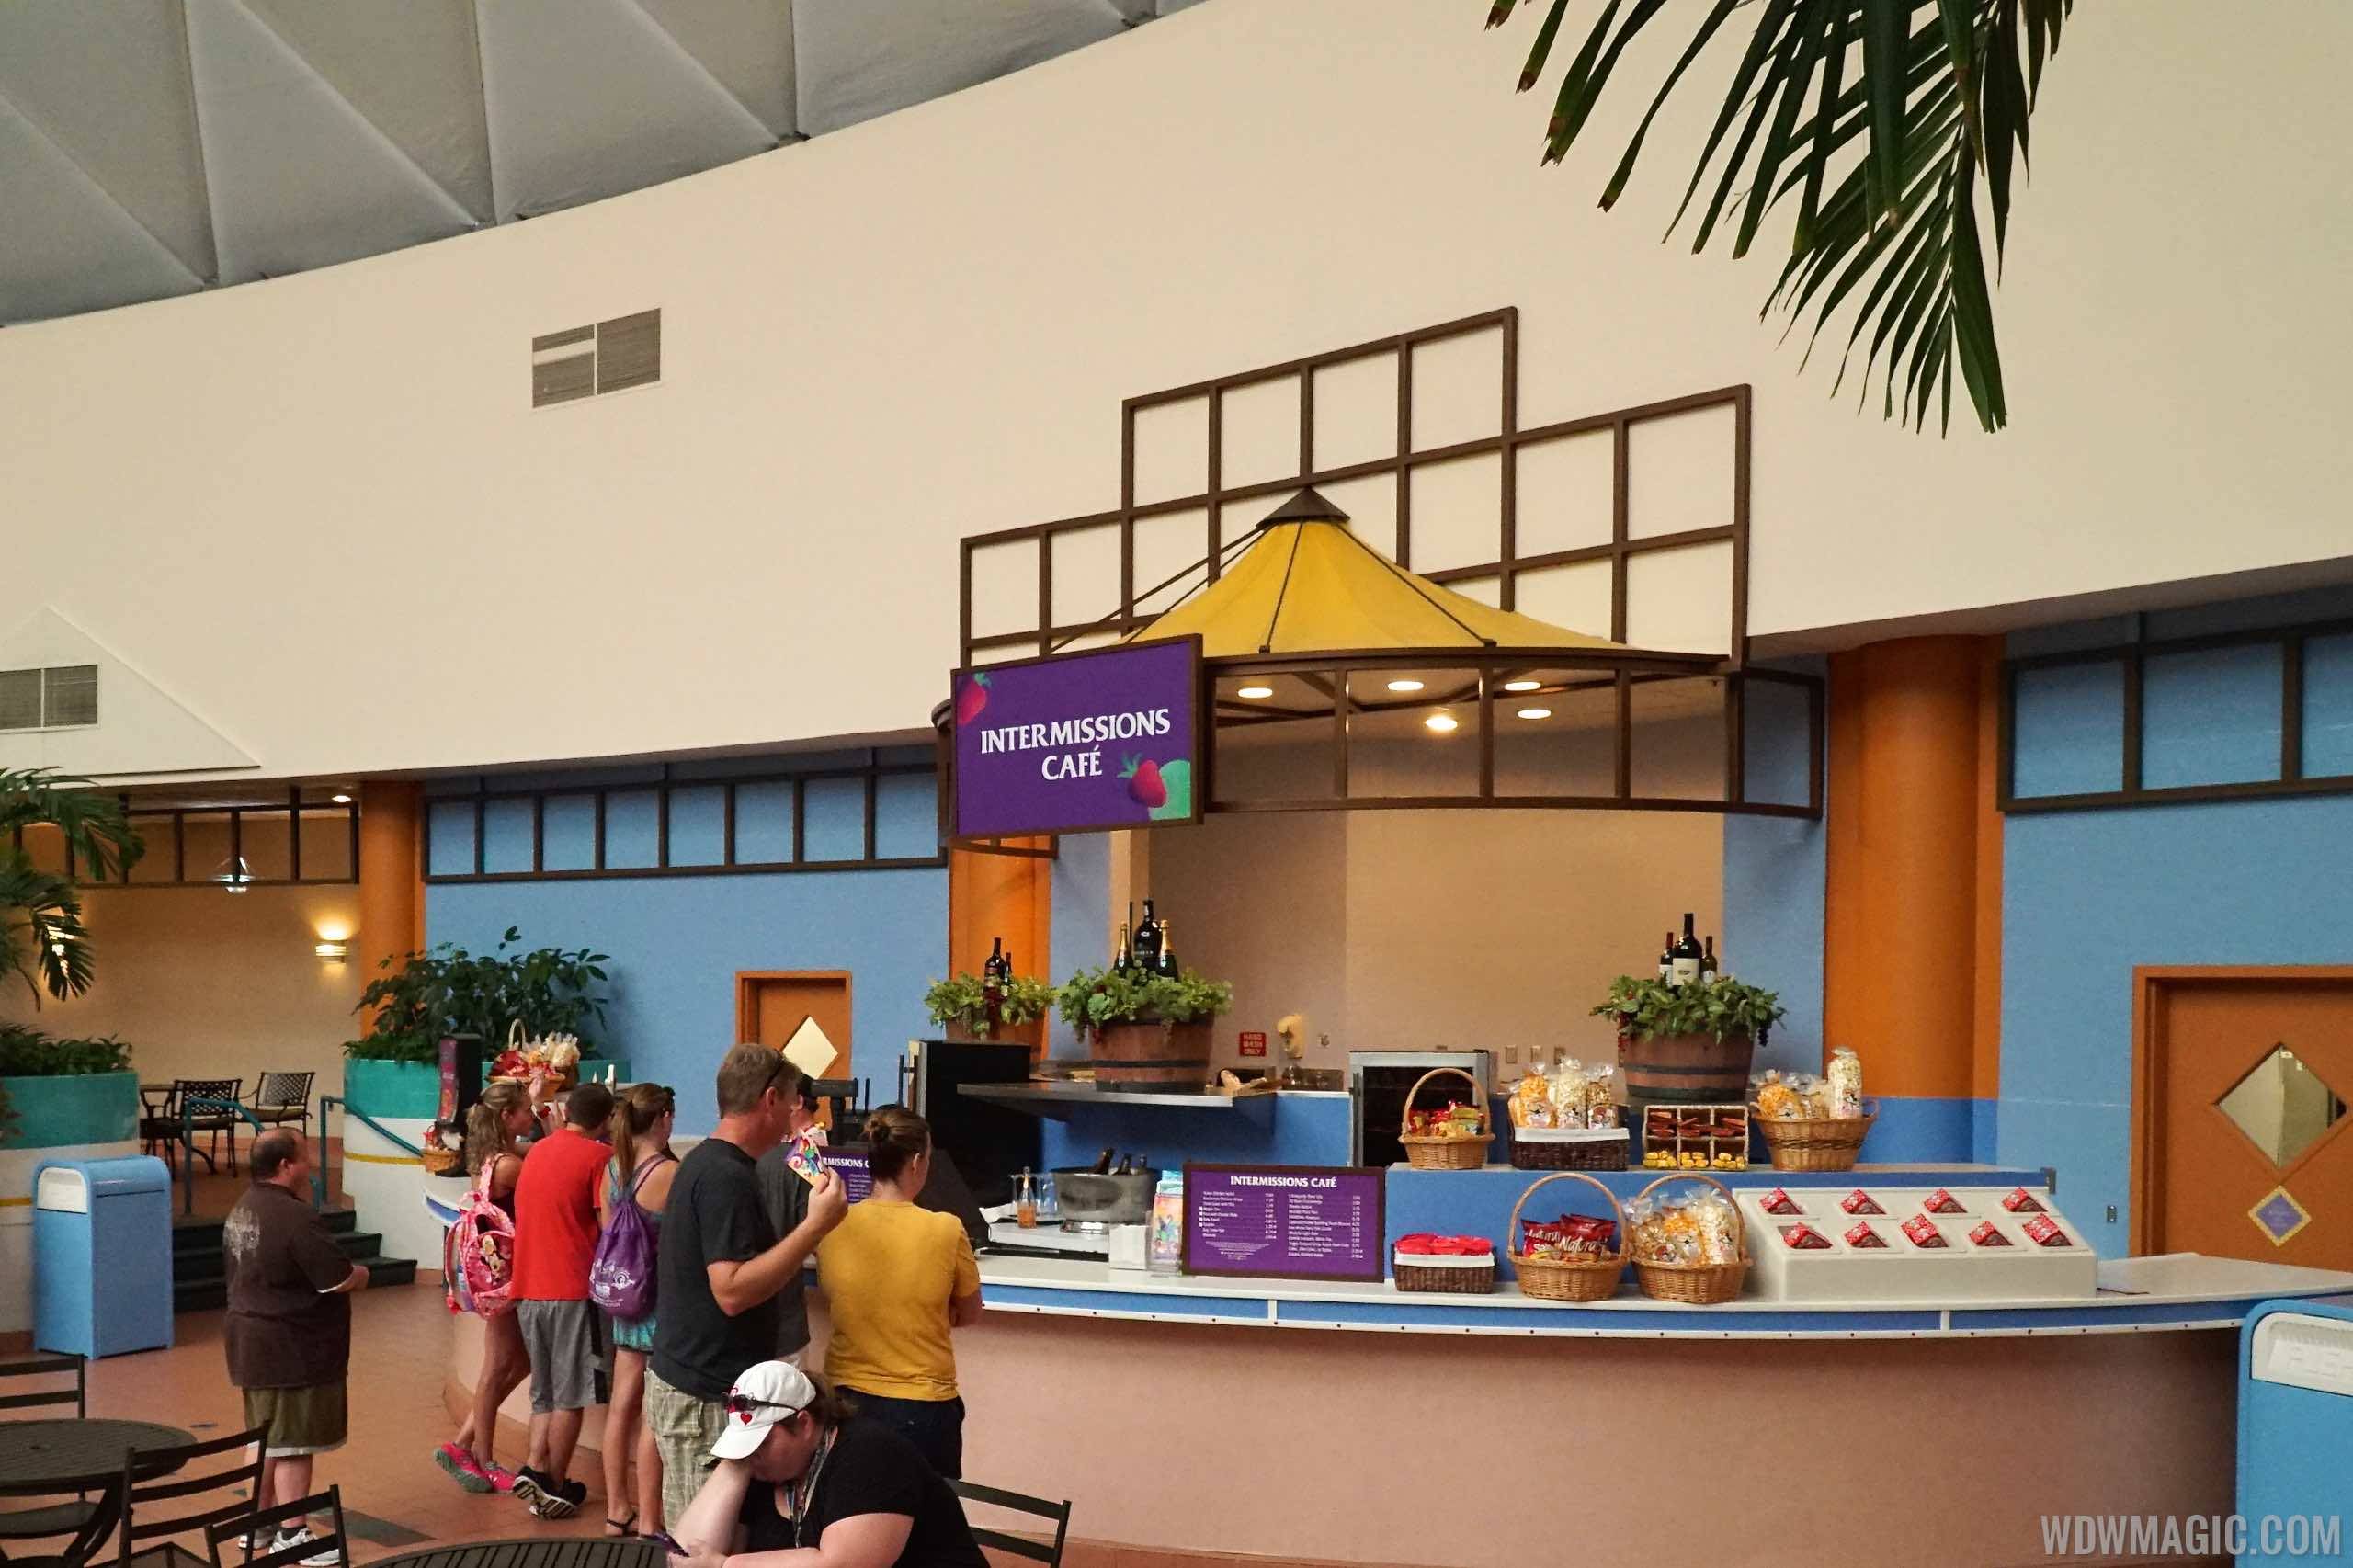 Intermissions Cafe Food and Wine Marketplace overview